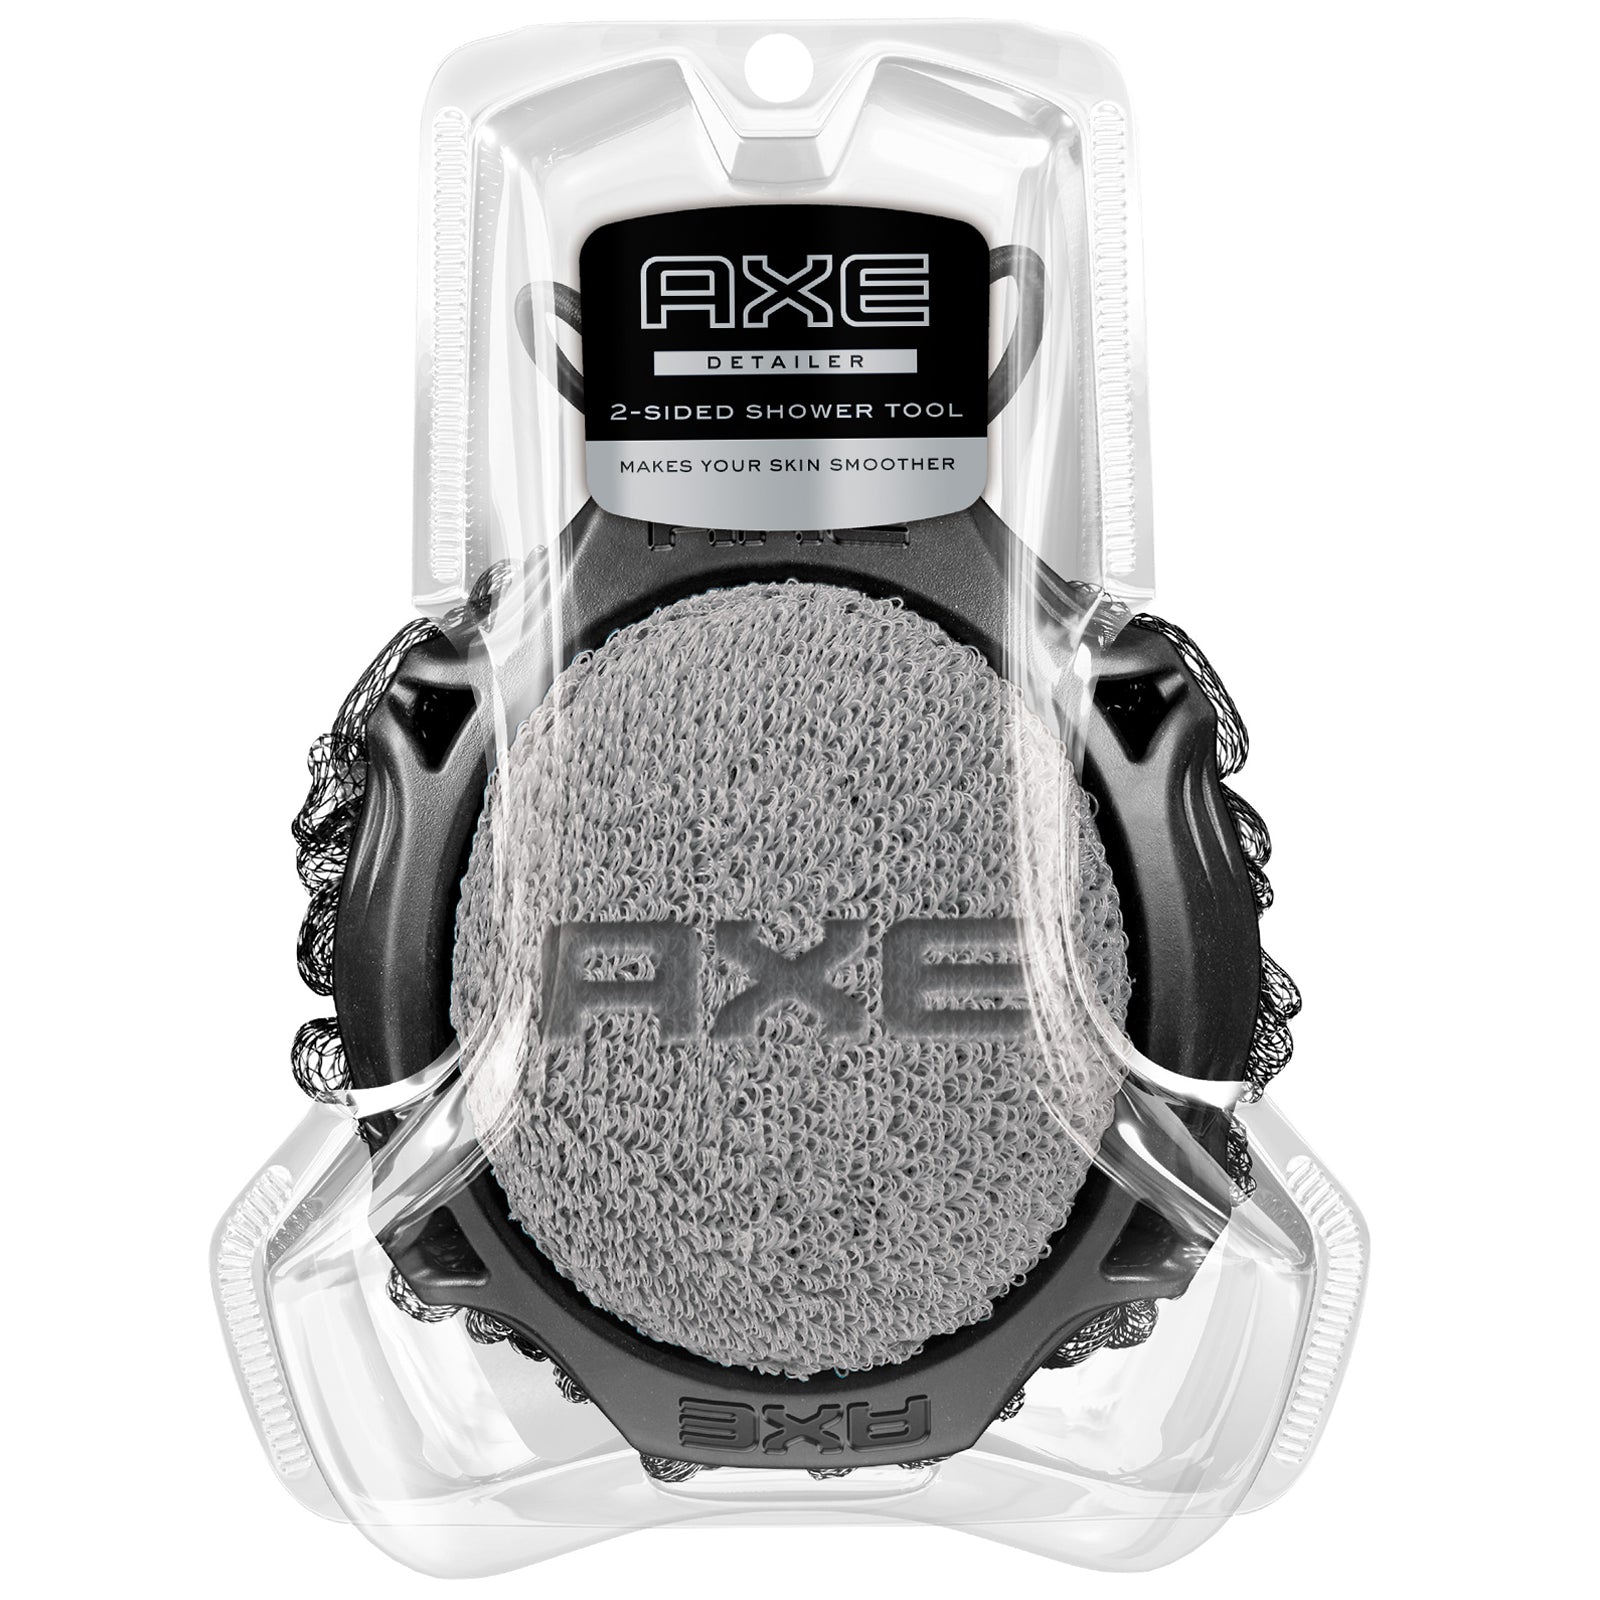 Axe, Detailer 2-Sided Shower Tool, 1 Count